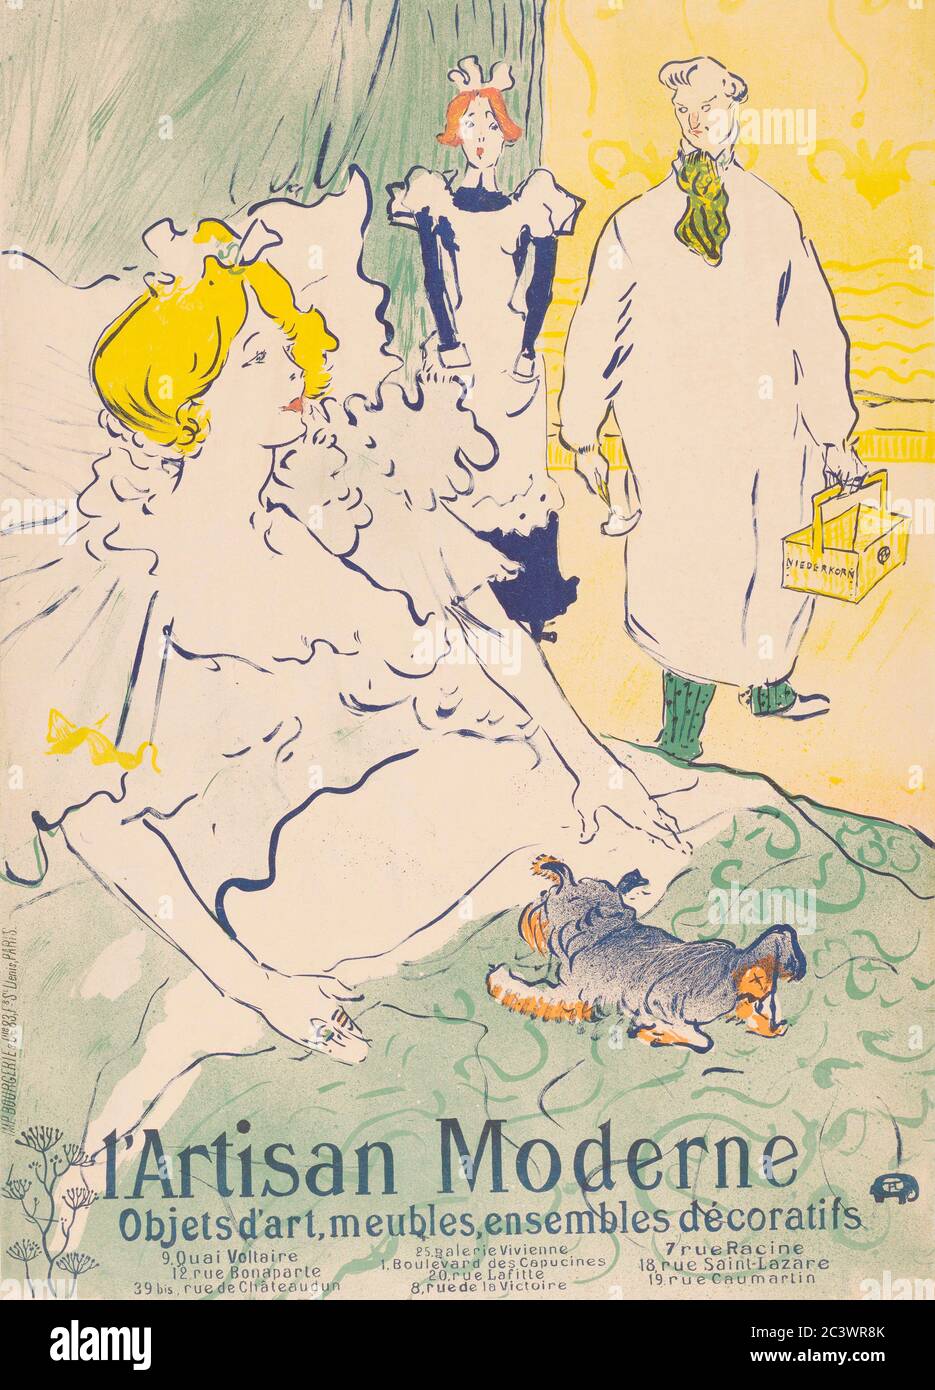 L'artisan moderne.  Advertising poster from 1894 by Henri de Toulouse-Lautrec. Henri de Toulouse-Lautrec, French artist, 1864-1901. Stock Photo